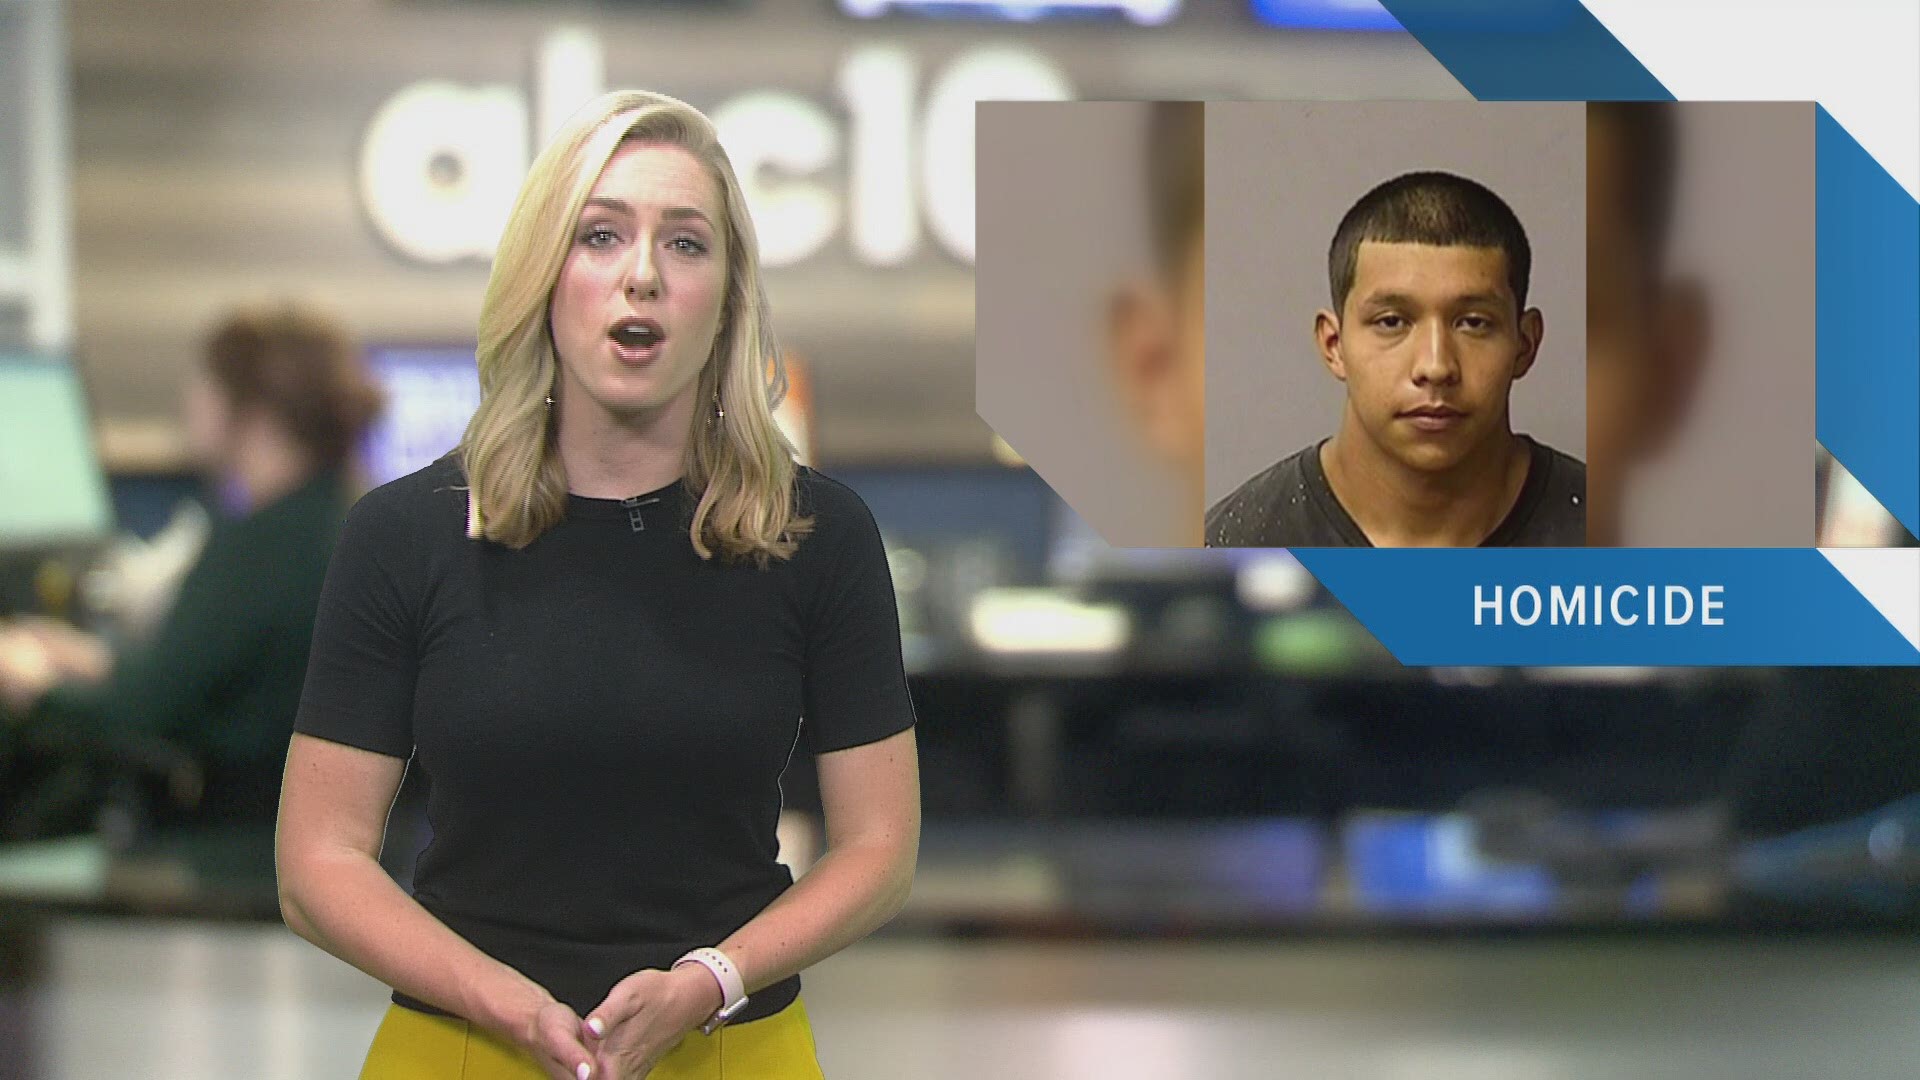 Evening Headlines: July 10, 2019 | Catch in-depth reporting on #LateNewsTonight at 11 p.m. | The latest Sacramento news is always at www.abc10.com